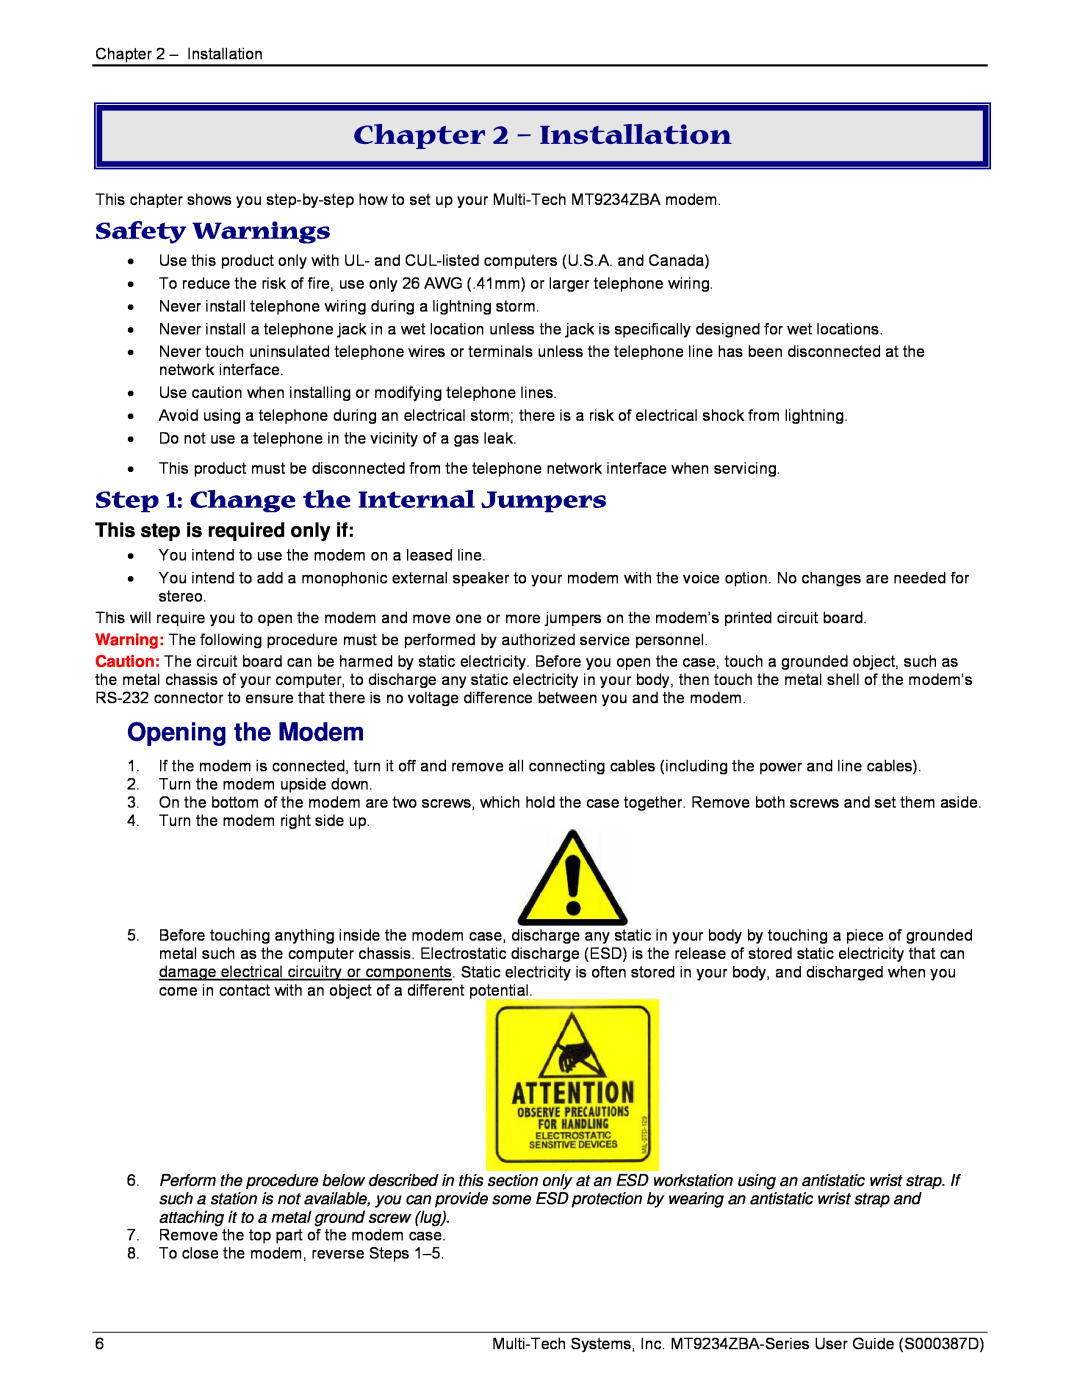 Multi-Tech Systems MT9234ZBA manual Installation, Safety Warnings, Change the Internal Jumpers, Opening the Modem 